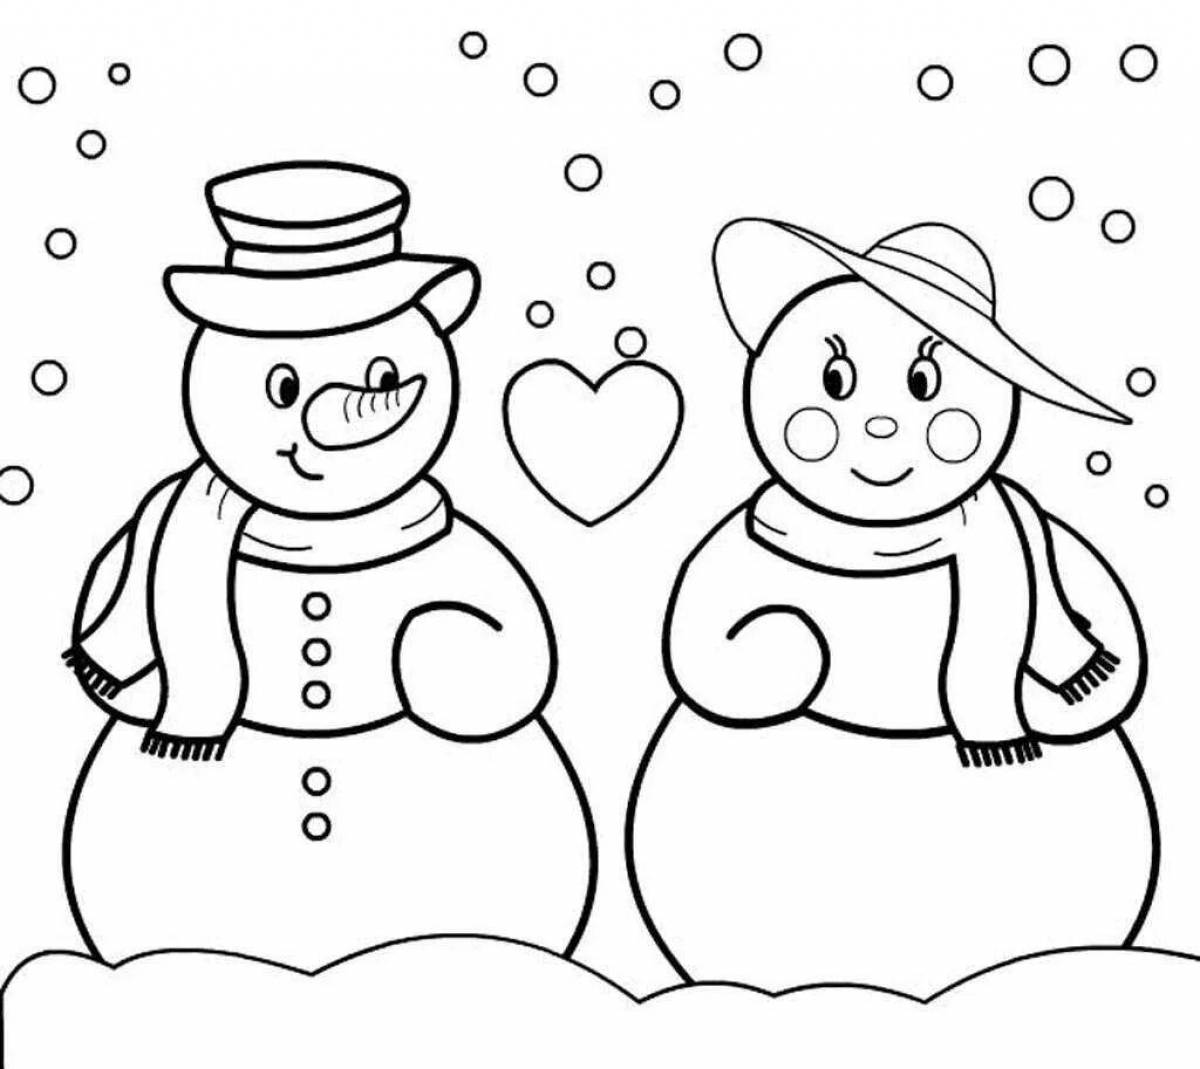 Magic snowman drawing for kids